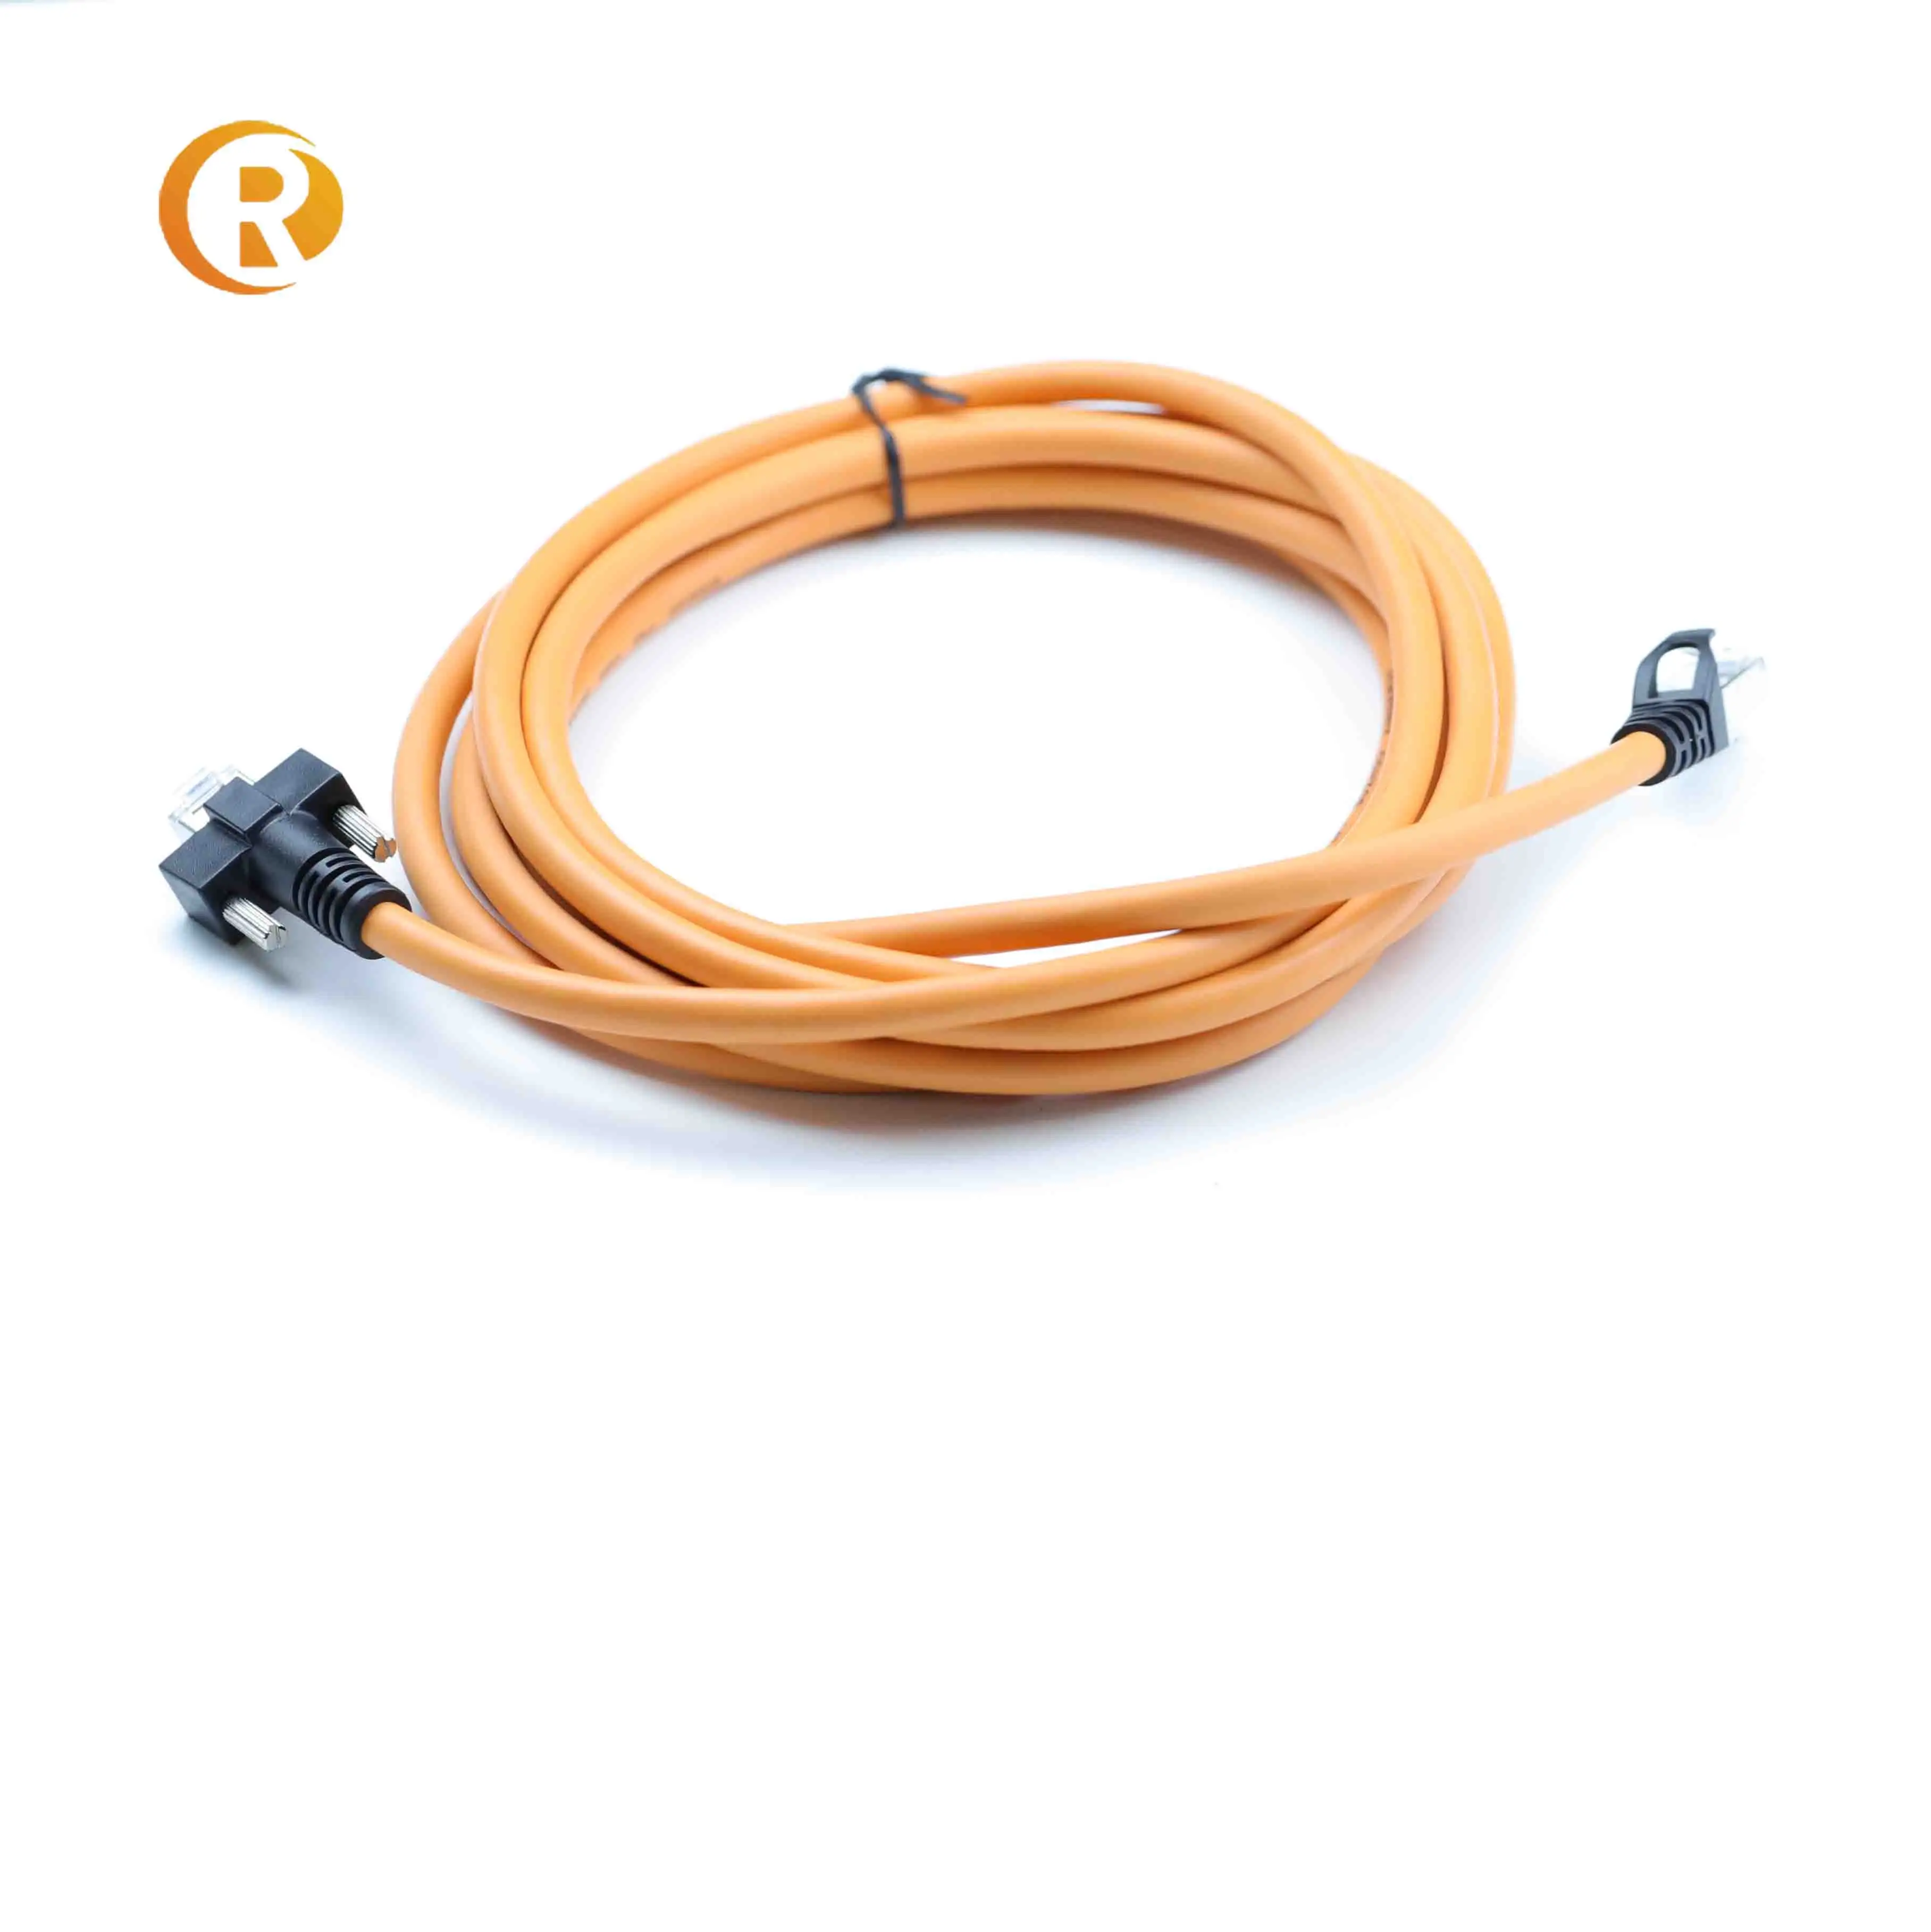 Custom Ethernet cable 0.5m-50m cat6 patch cable utp shield patch cord rj45 connector orange cable for Telecommunication Comput